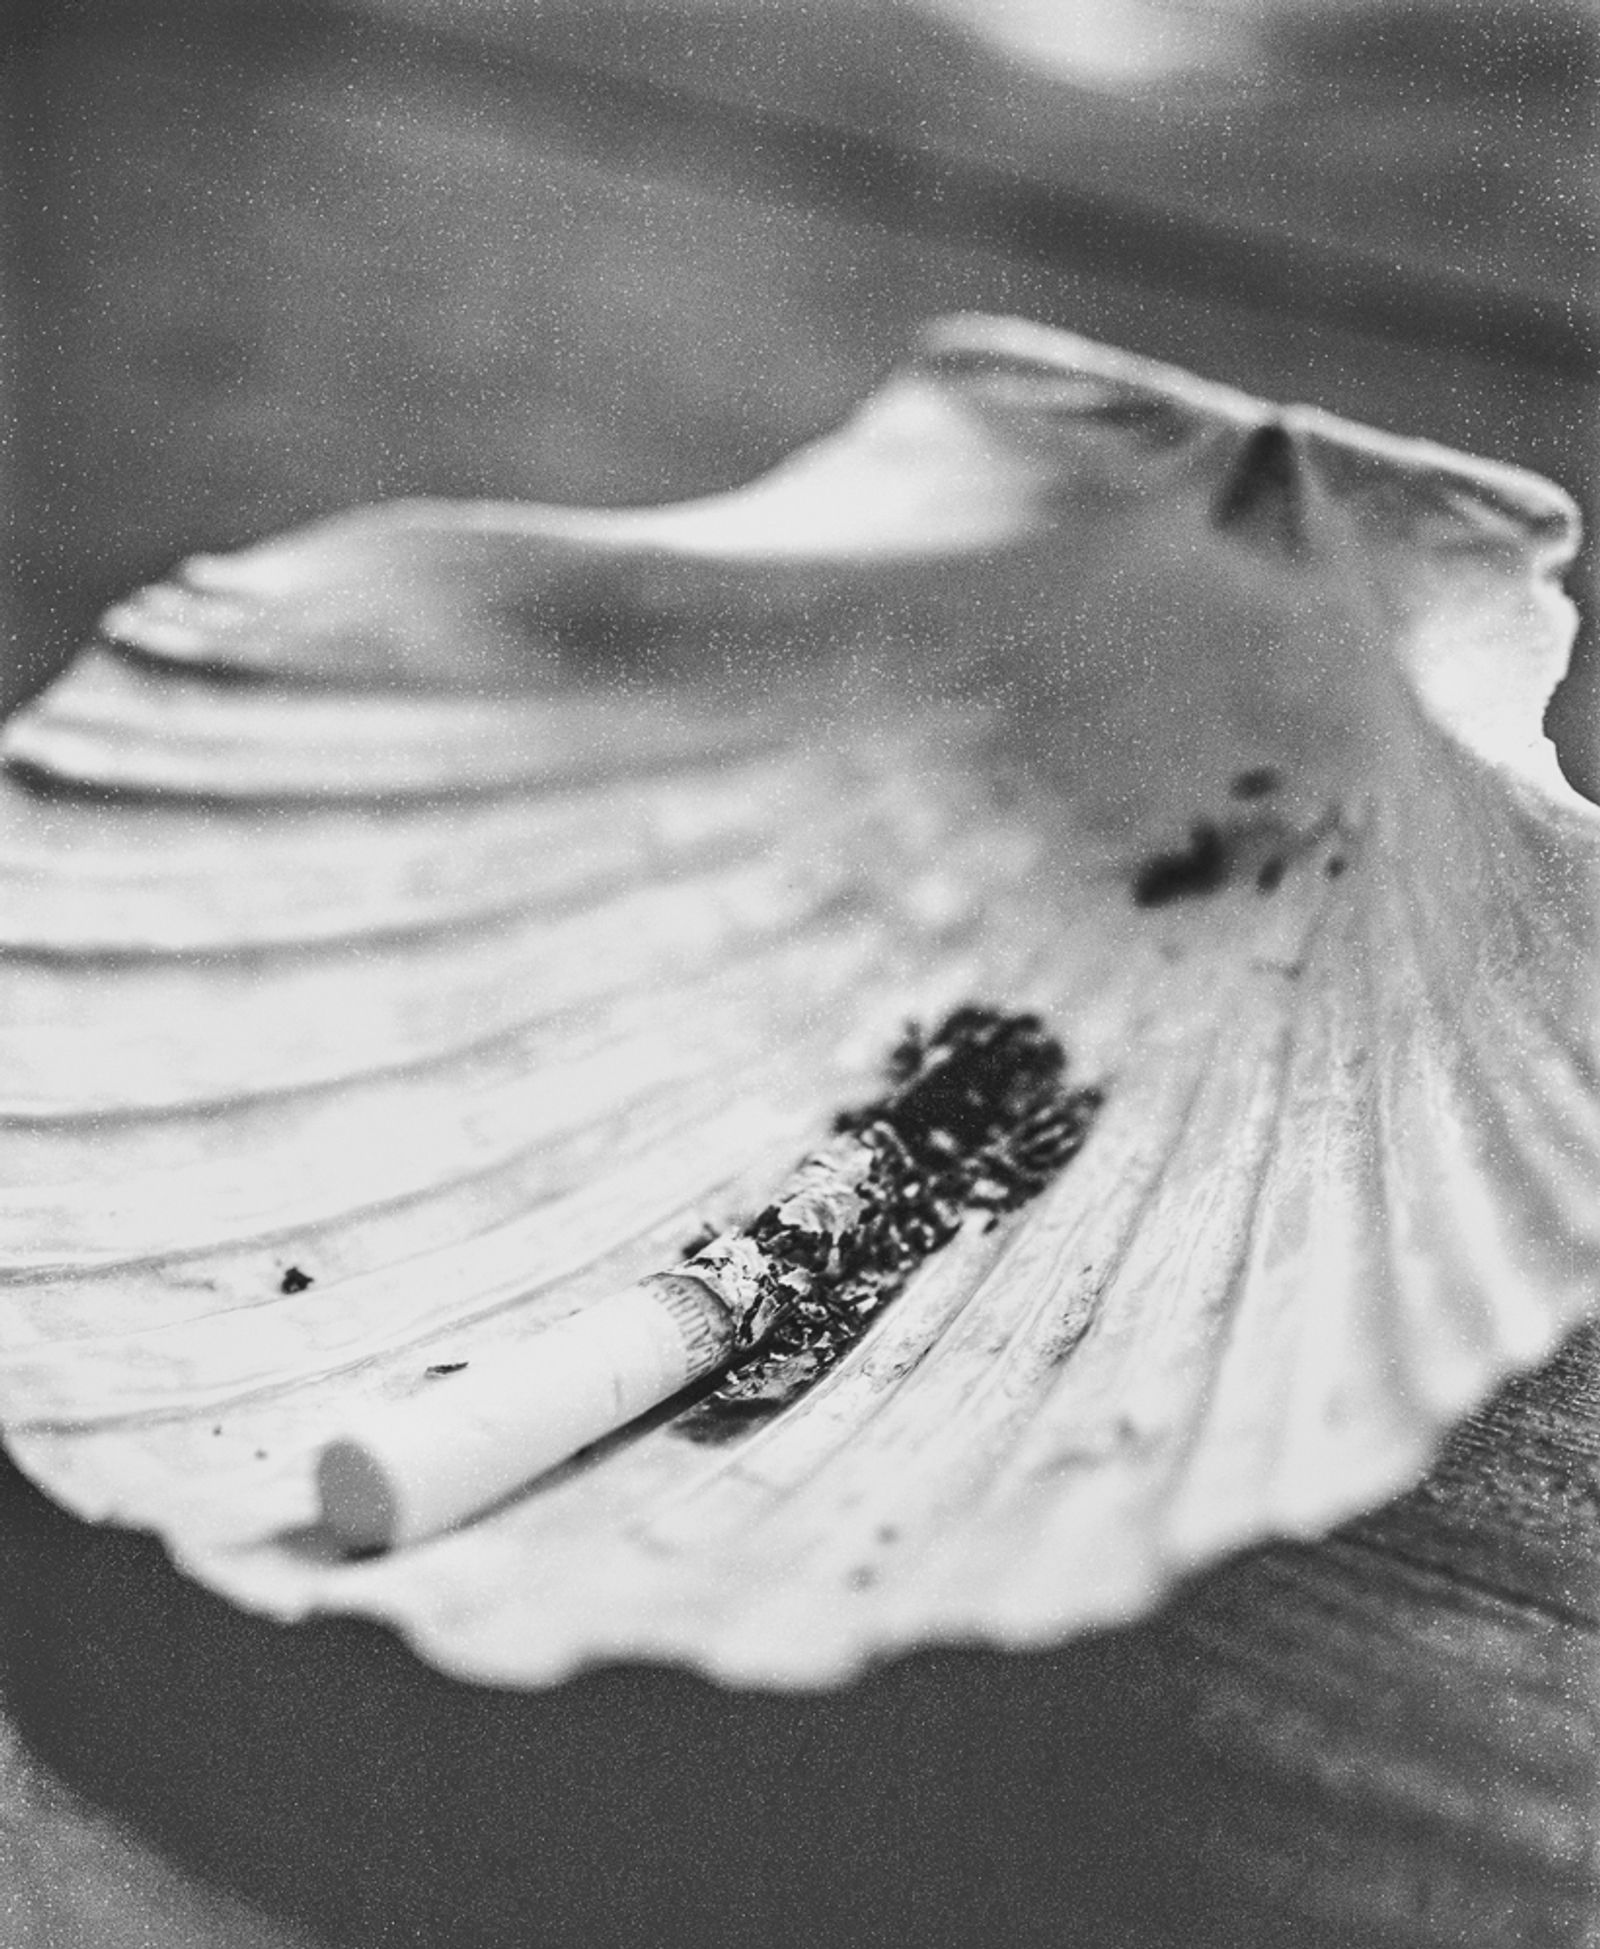 © Rita Puig-Serra Costa - Image from the Anatomy of an Oyster photography project